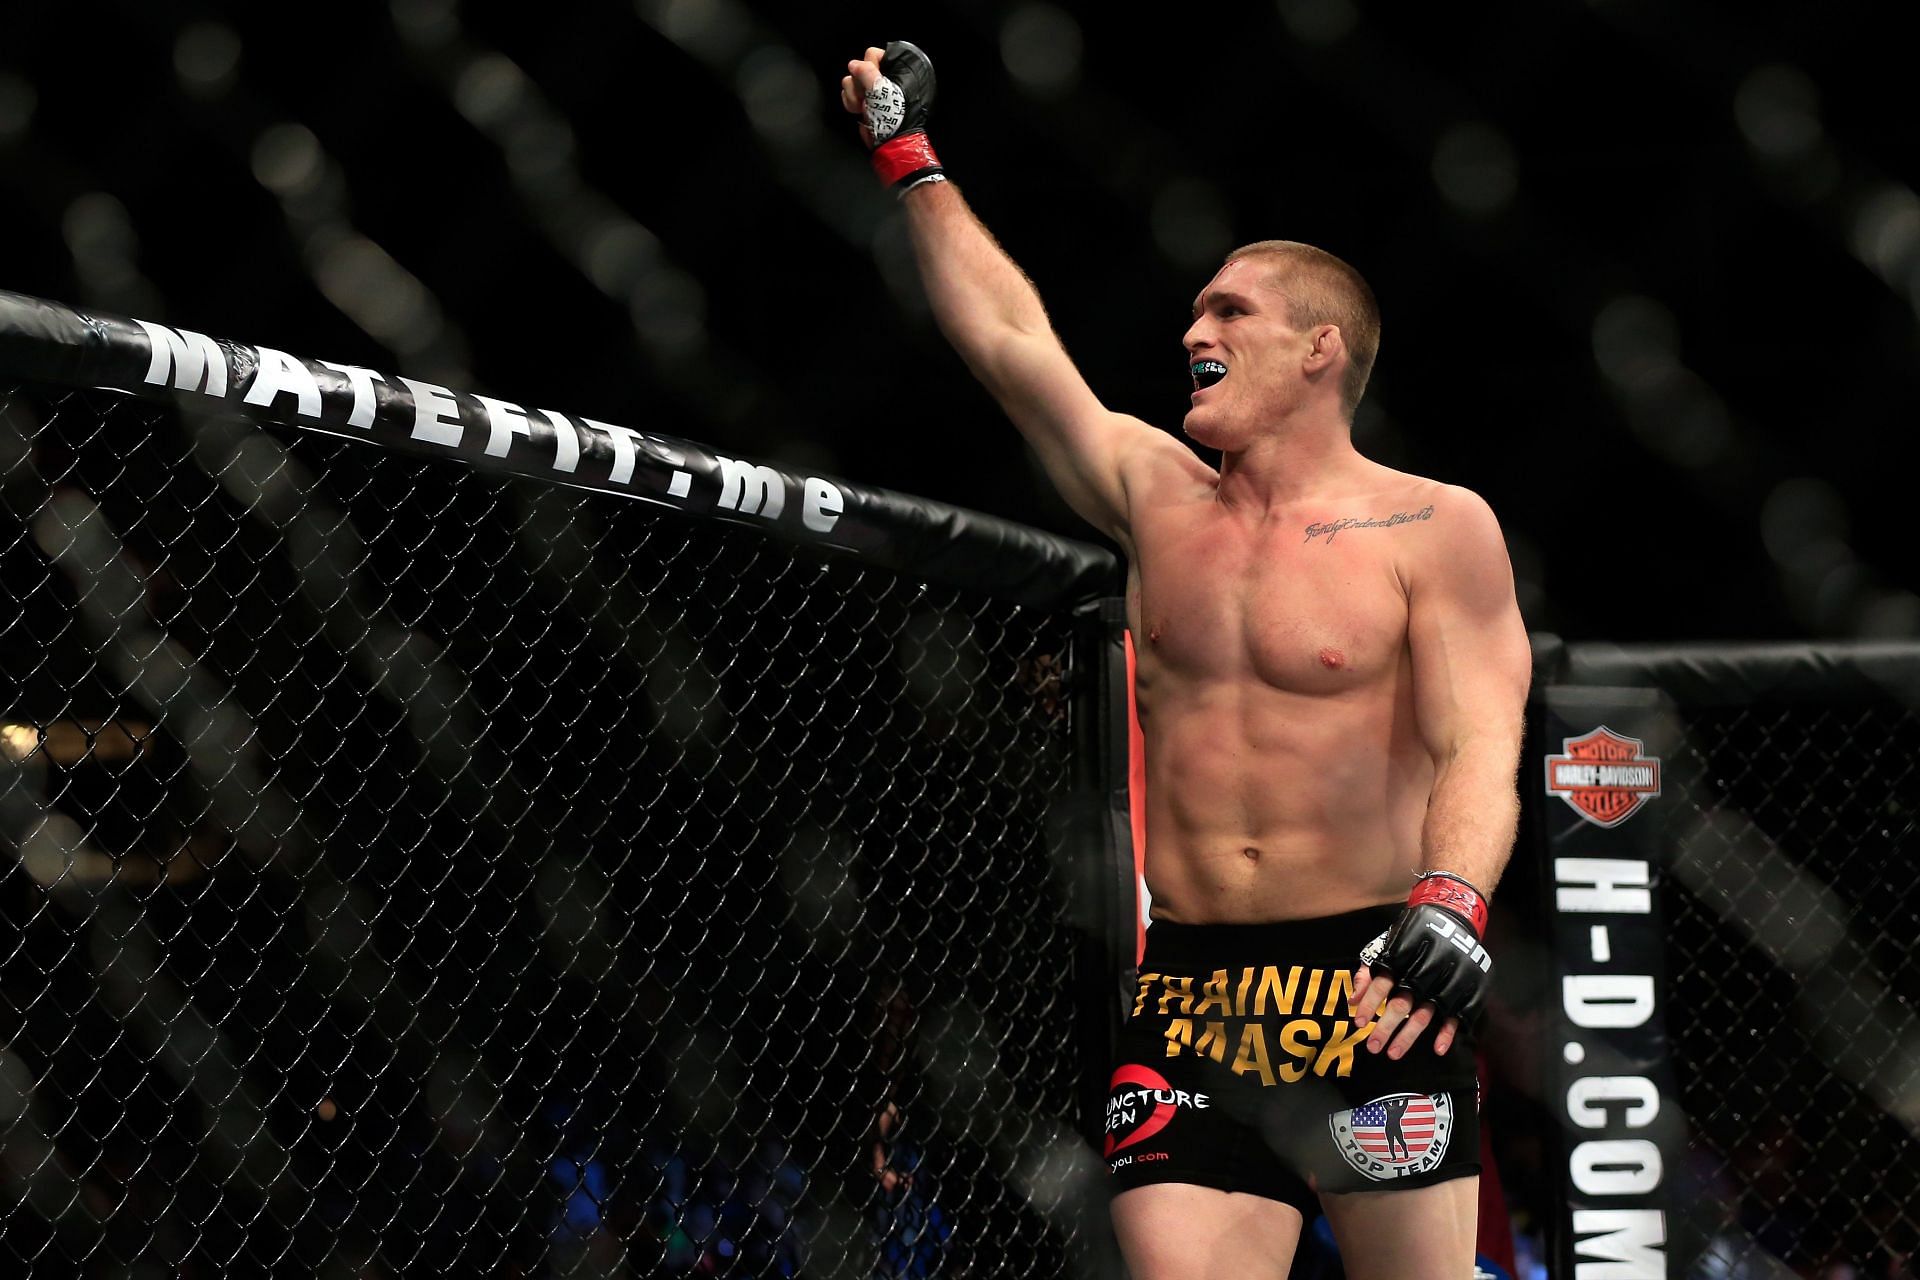 Todd Duffee was cut for supposed attitude problems in 2010, only to return two years later